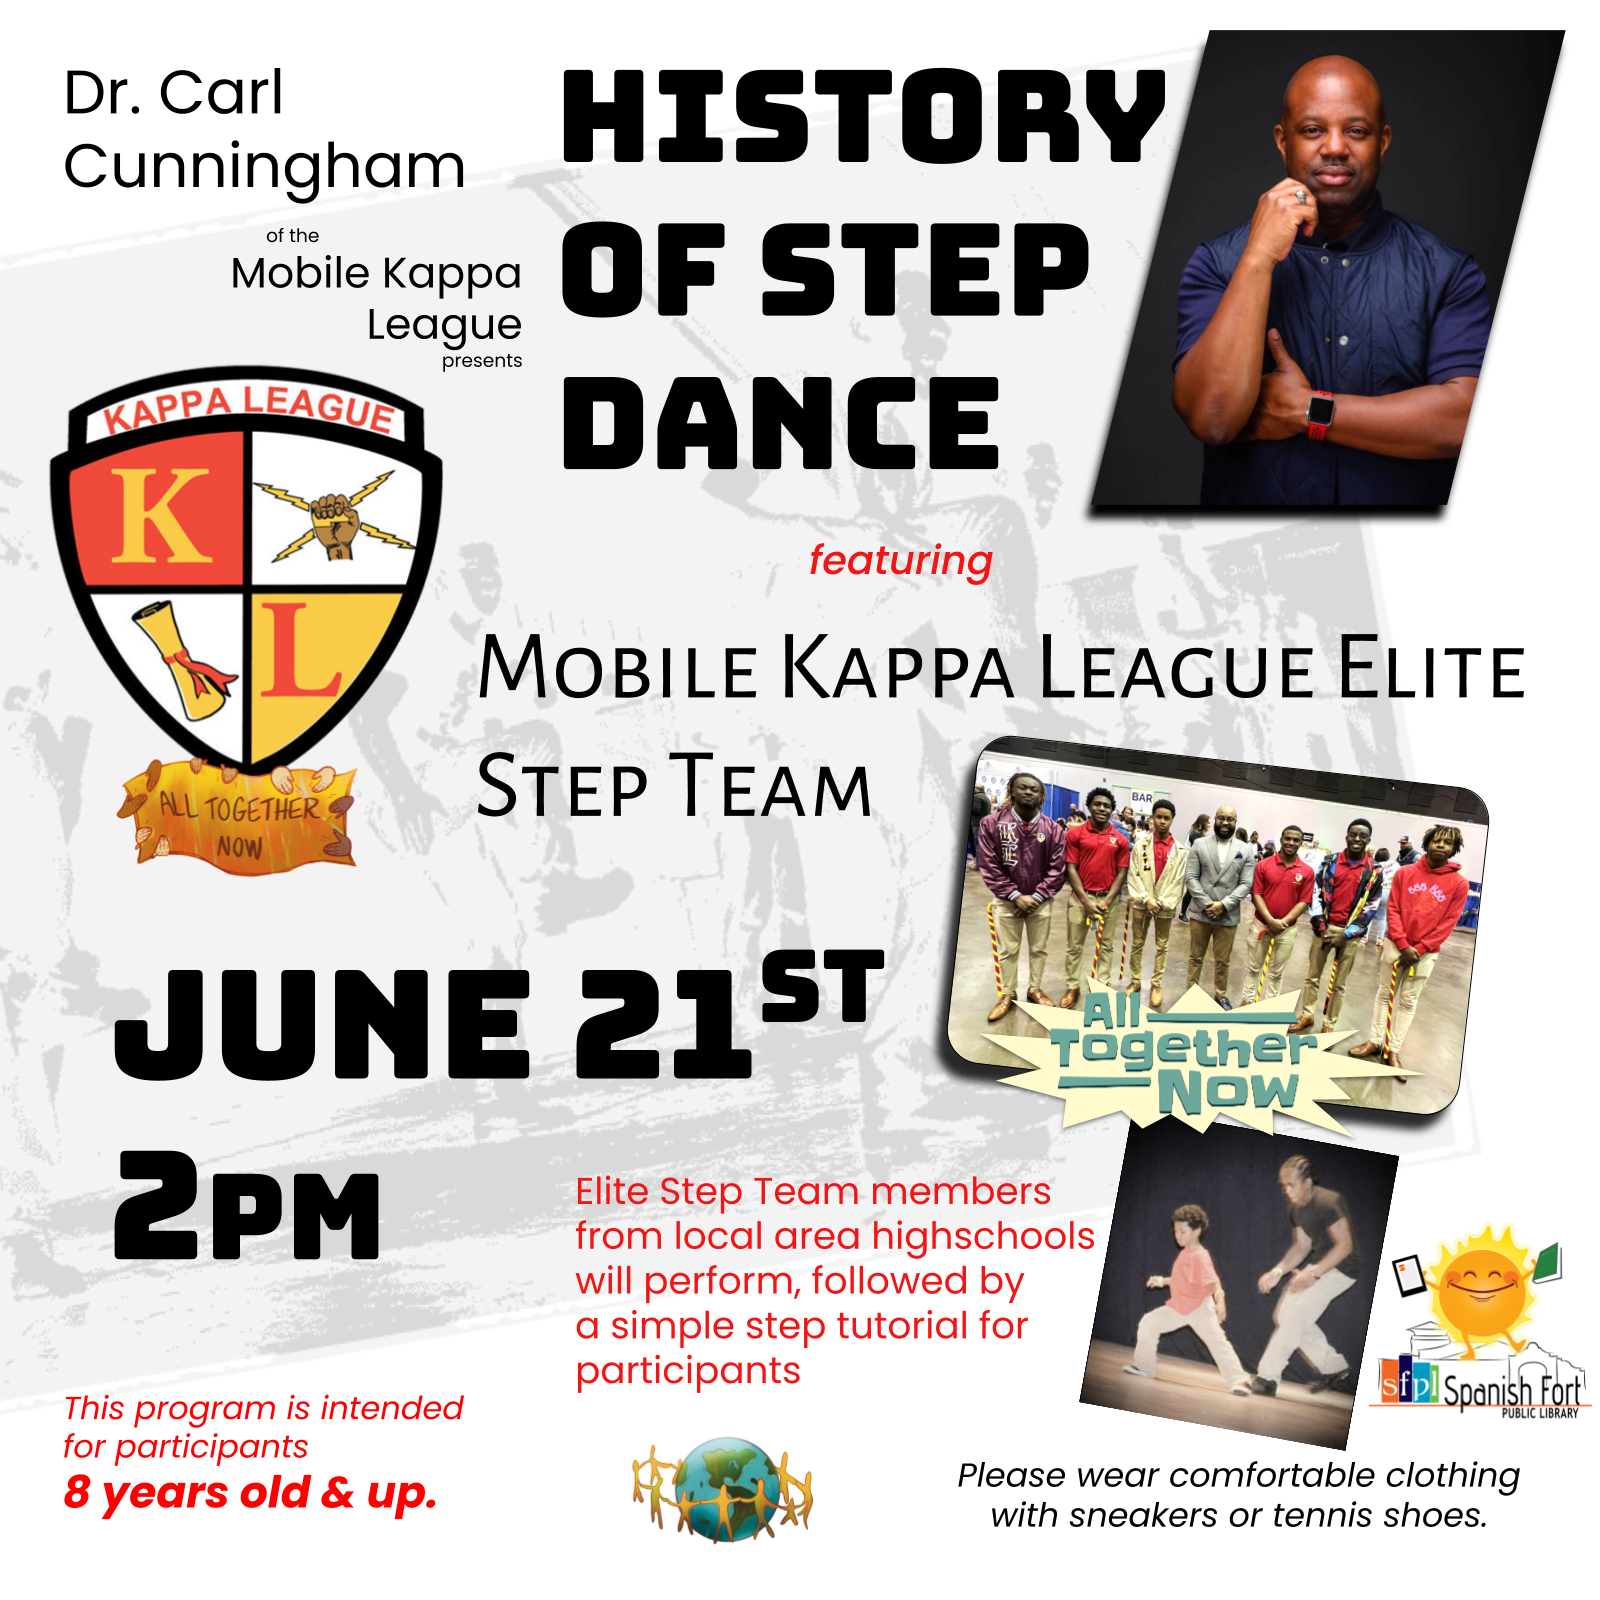 Mobile Kappa League Elite History of Step & Dance Presentation Wednesday, June 21, 2023 at 2:00 p.m. for ages 8 & up. All participants will be given the opportunity to join in a FREE simple step dance routine courtesy of the ELITE Step team members; wear comfortable shoes